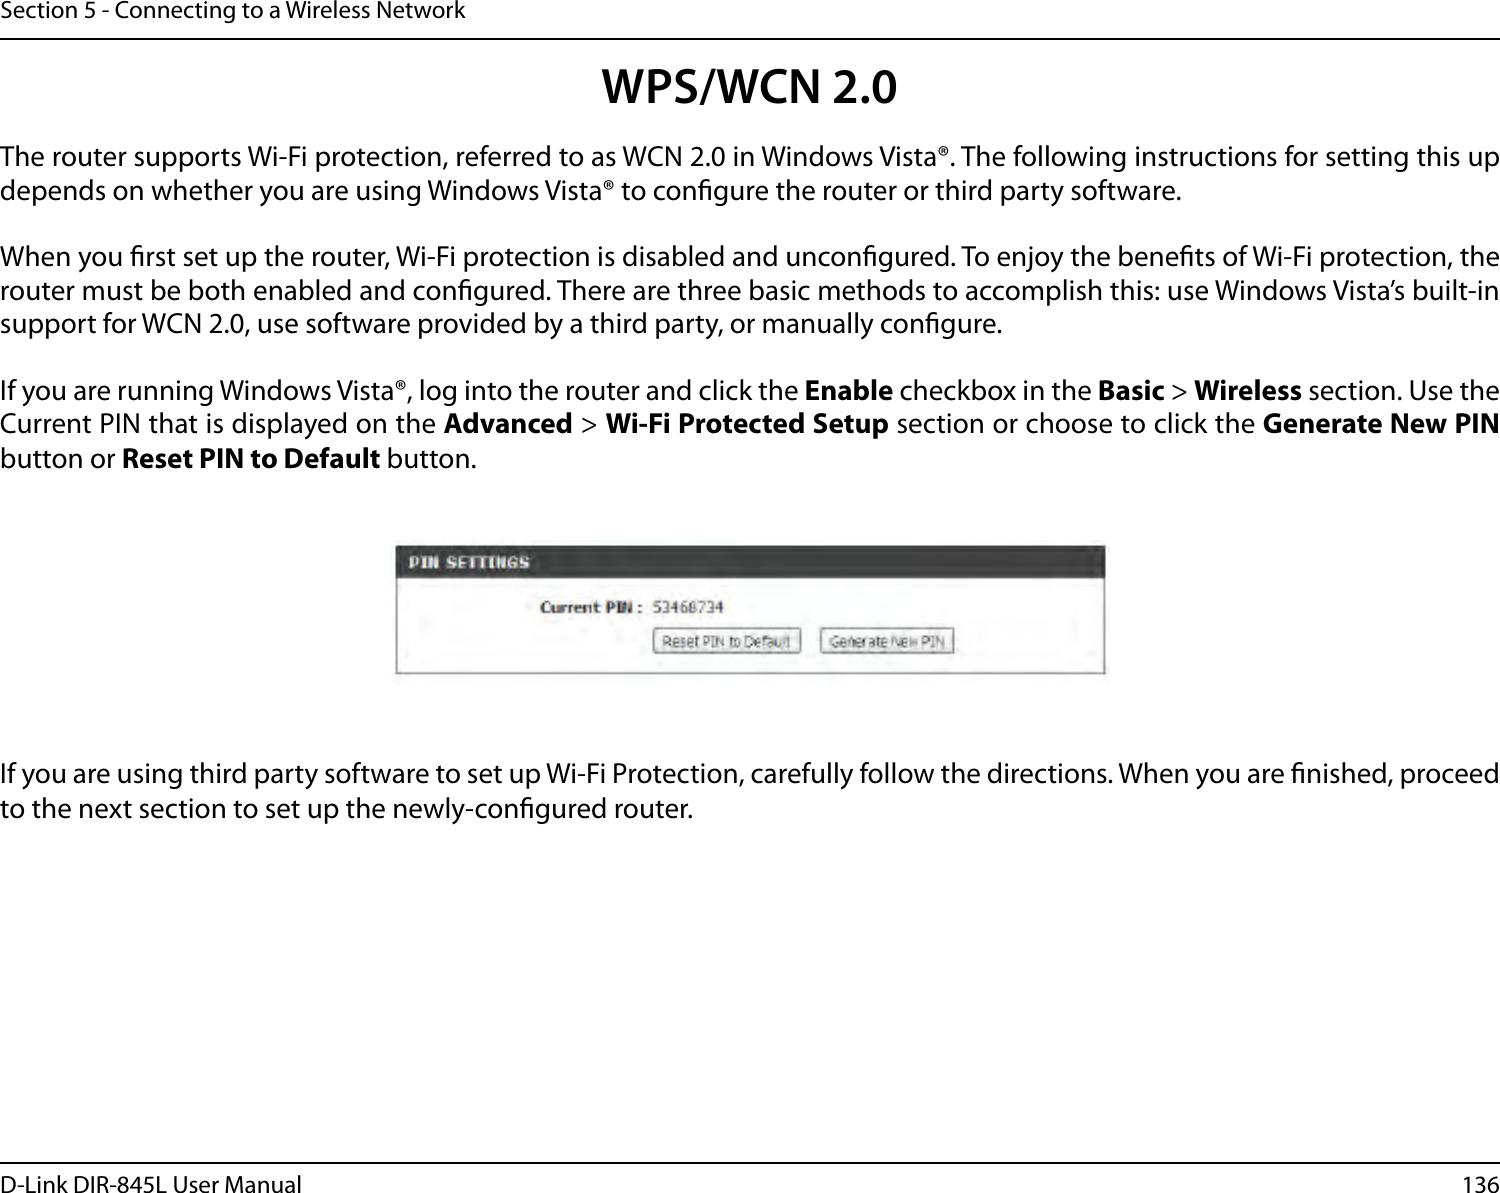 136D-Link DIR-845L User ManualSection 5 - Connecting to a Wireless NetworkWPS/WCN 2.0The router supports Wi-Fi protection, referred to as WCN 2.0 in Windows Vista®. The following instructions for setting this up depends on whether you are using Windows Vista® to congure the router or third party software.        When you rst set up the router, Wi-Fi protection is disabled and uncongured. To enjoy the benets of Wi-Fi protection, the router must be both enabled and congured. There are three basic methods to accomplish this: use Windows Vista’s built-in support for WCN 2.0, use software provided by a third party, or manually congure. If you are running Windows Vista®, log into the router and click the Enable checkbox in the Basic &gt; Wireless section. Use the Current PIN that is displayed on the Advanced &gt; Wi-Fi Protected Setup section or choose to click the Generate New PIN button or Reset PIN to Default button. If you are using third party software to set up Wi-Fi Protection, carefully follow the directions. When you are nished, proceed to the next section to set up the newly-congured router. 